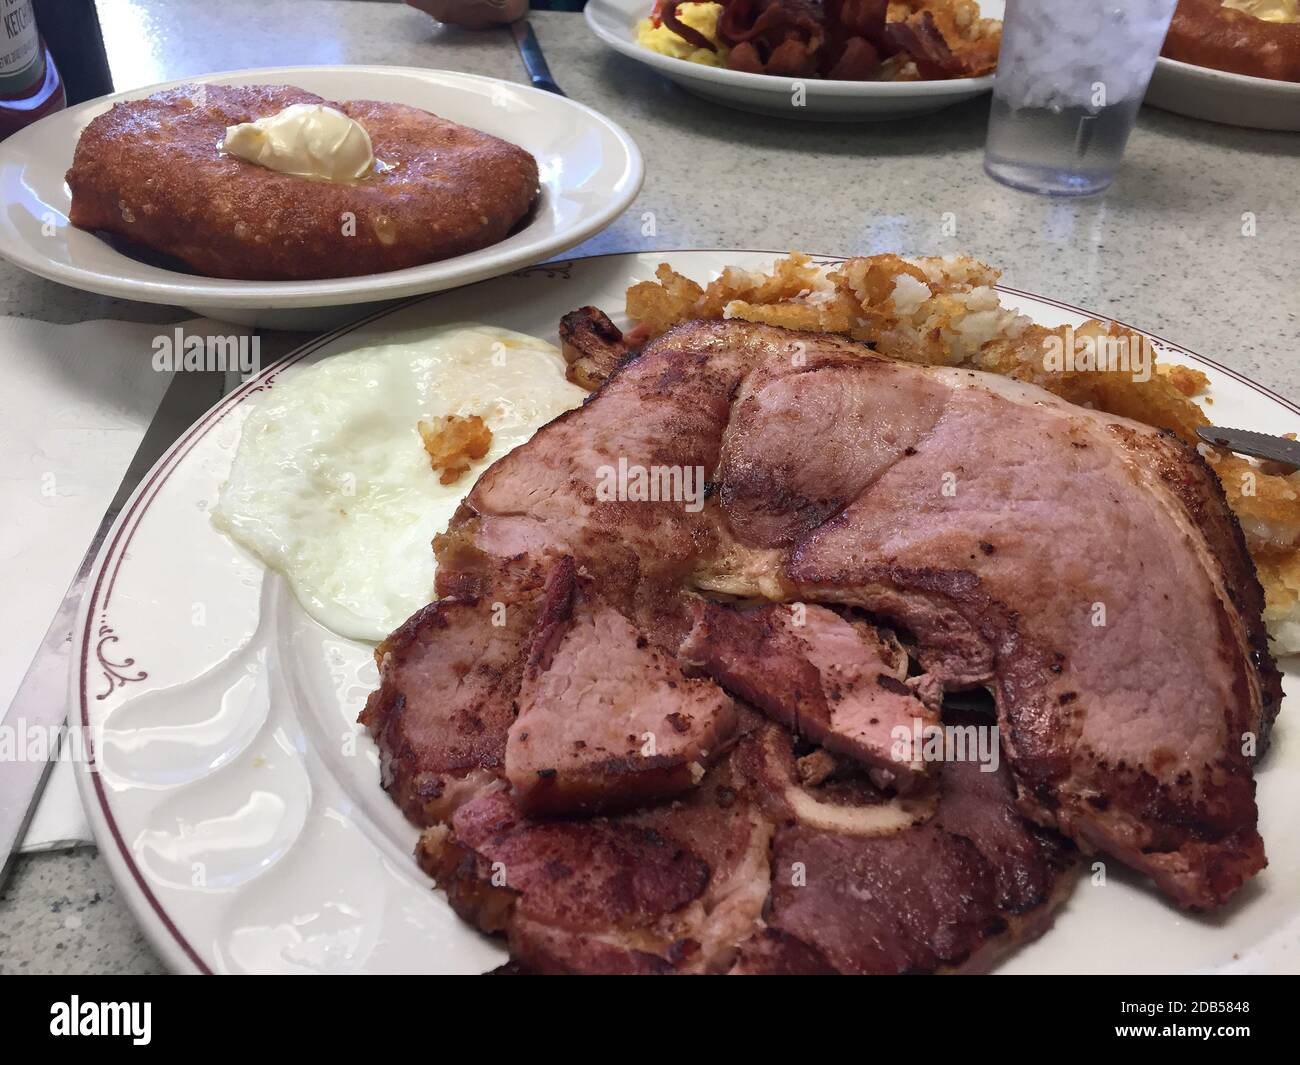 Ham and egg breakfast.  This traditional American breakfast is a staple in many restaurants. Stock Photo